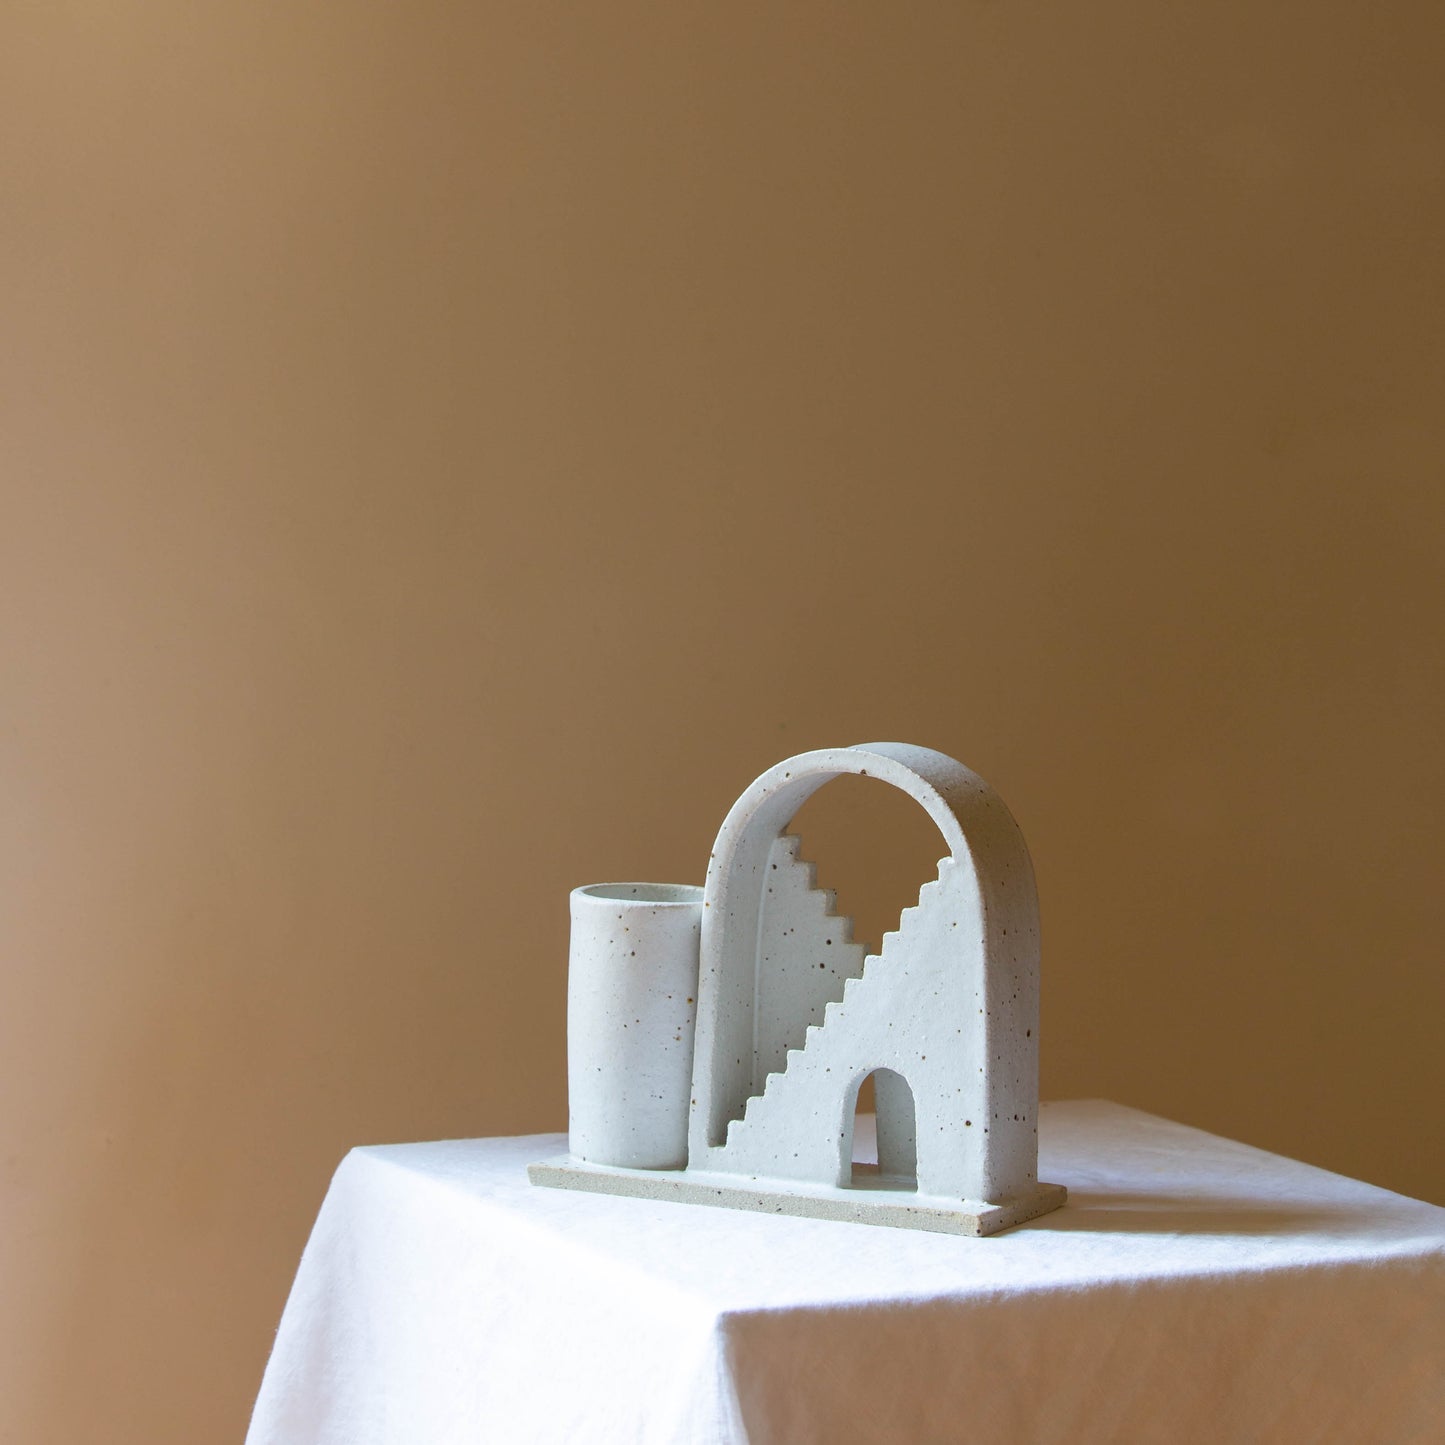 Handmade ceramic vase with arched detail and two mirrored staircases. The vase is finished in a speckled cream glaze. The budvase sits on a white plinth and is photographed on a cream background. 